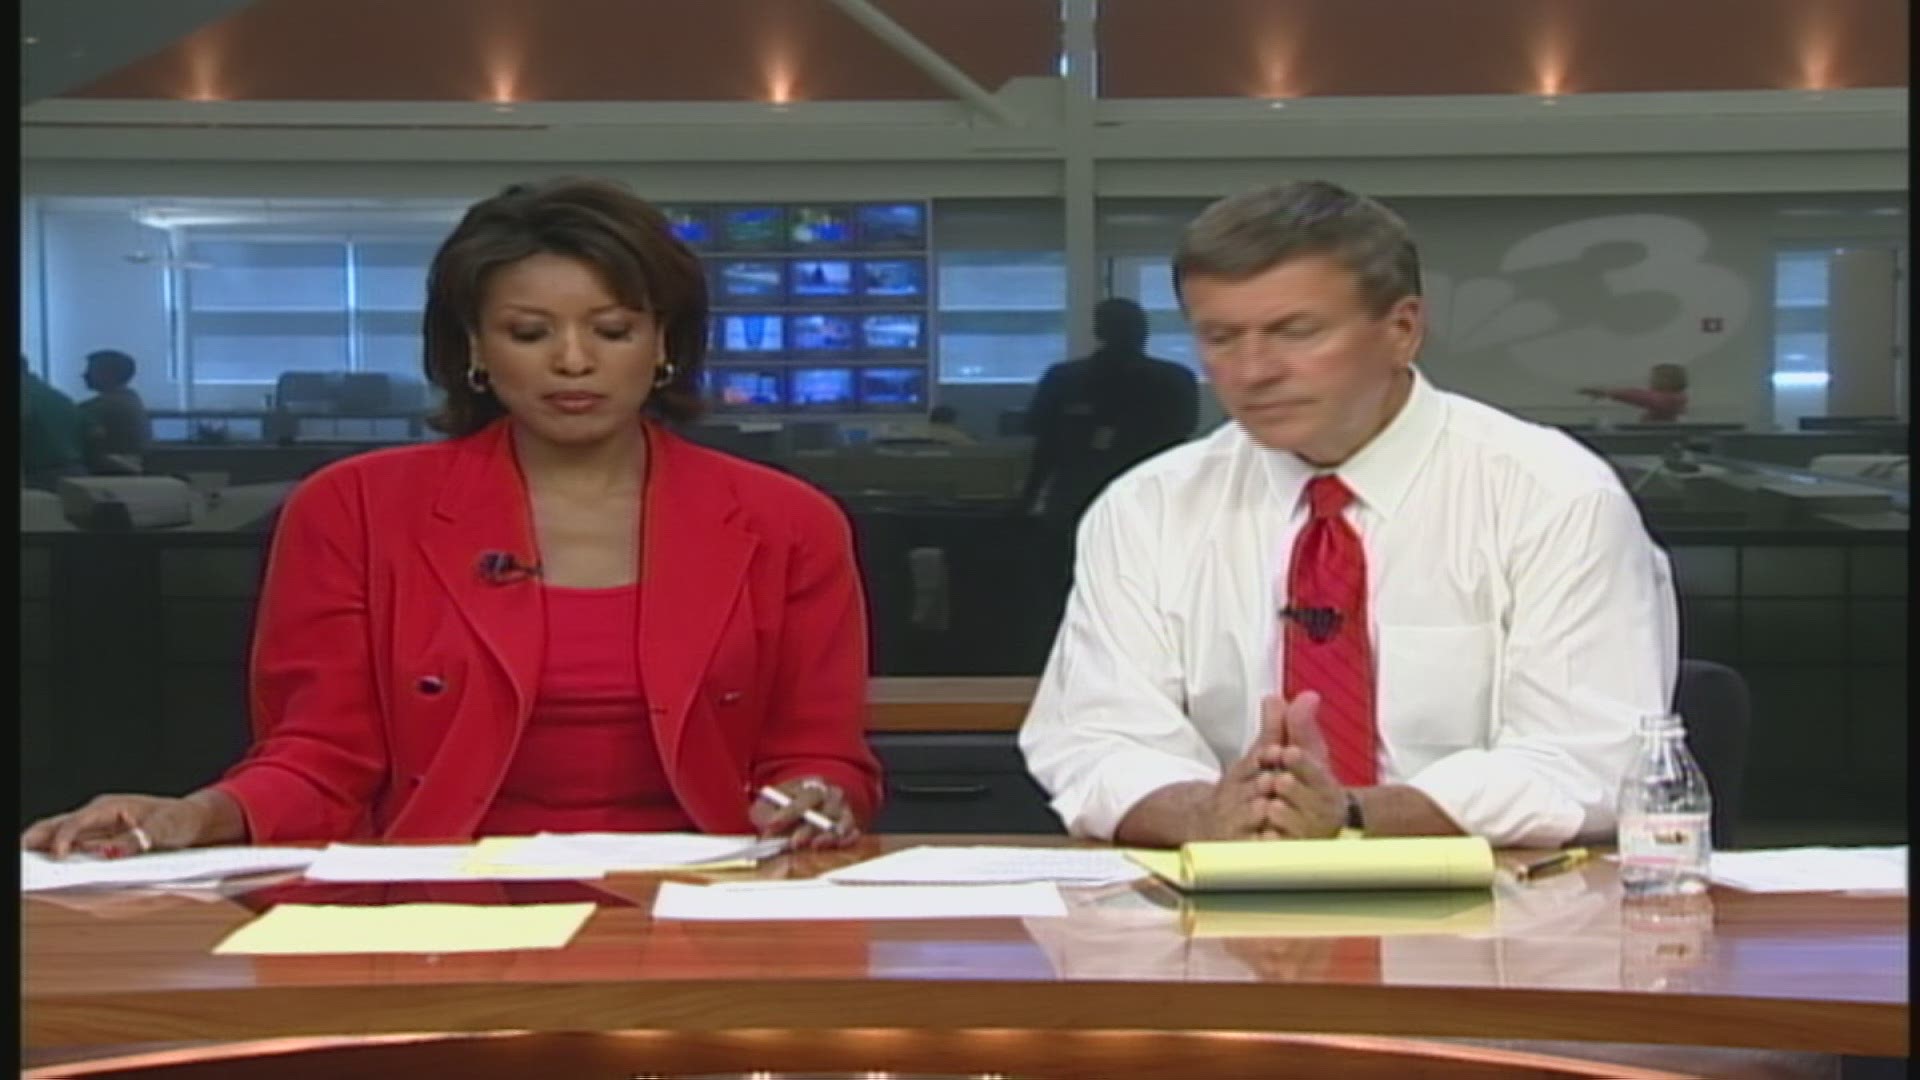 70 moments in WKYC history: Tim White and Romona Robinson broadcast on September 11, 2001